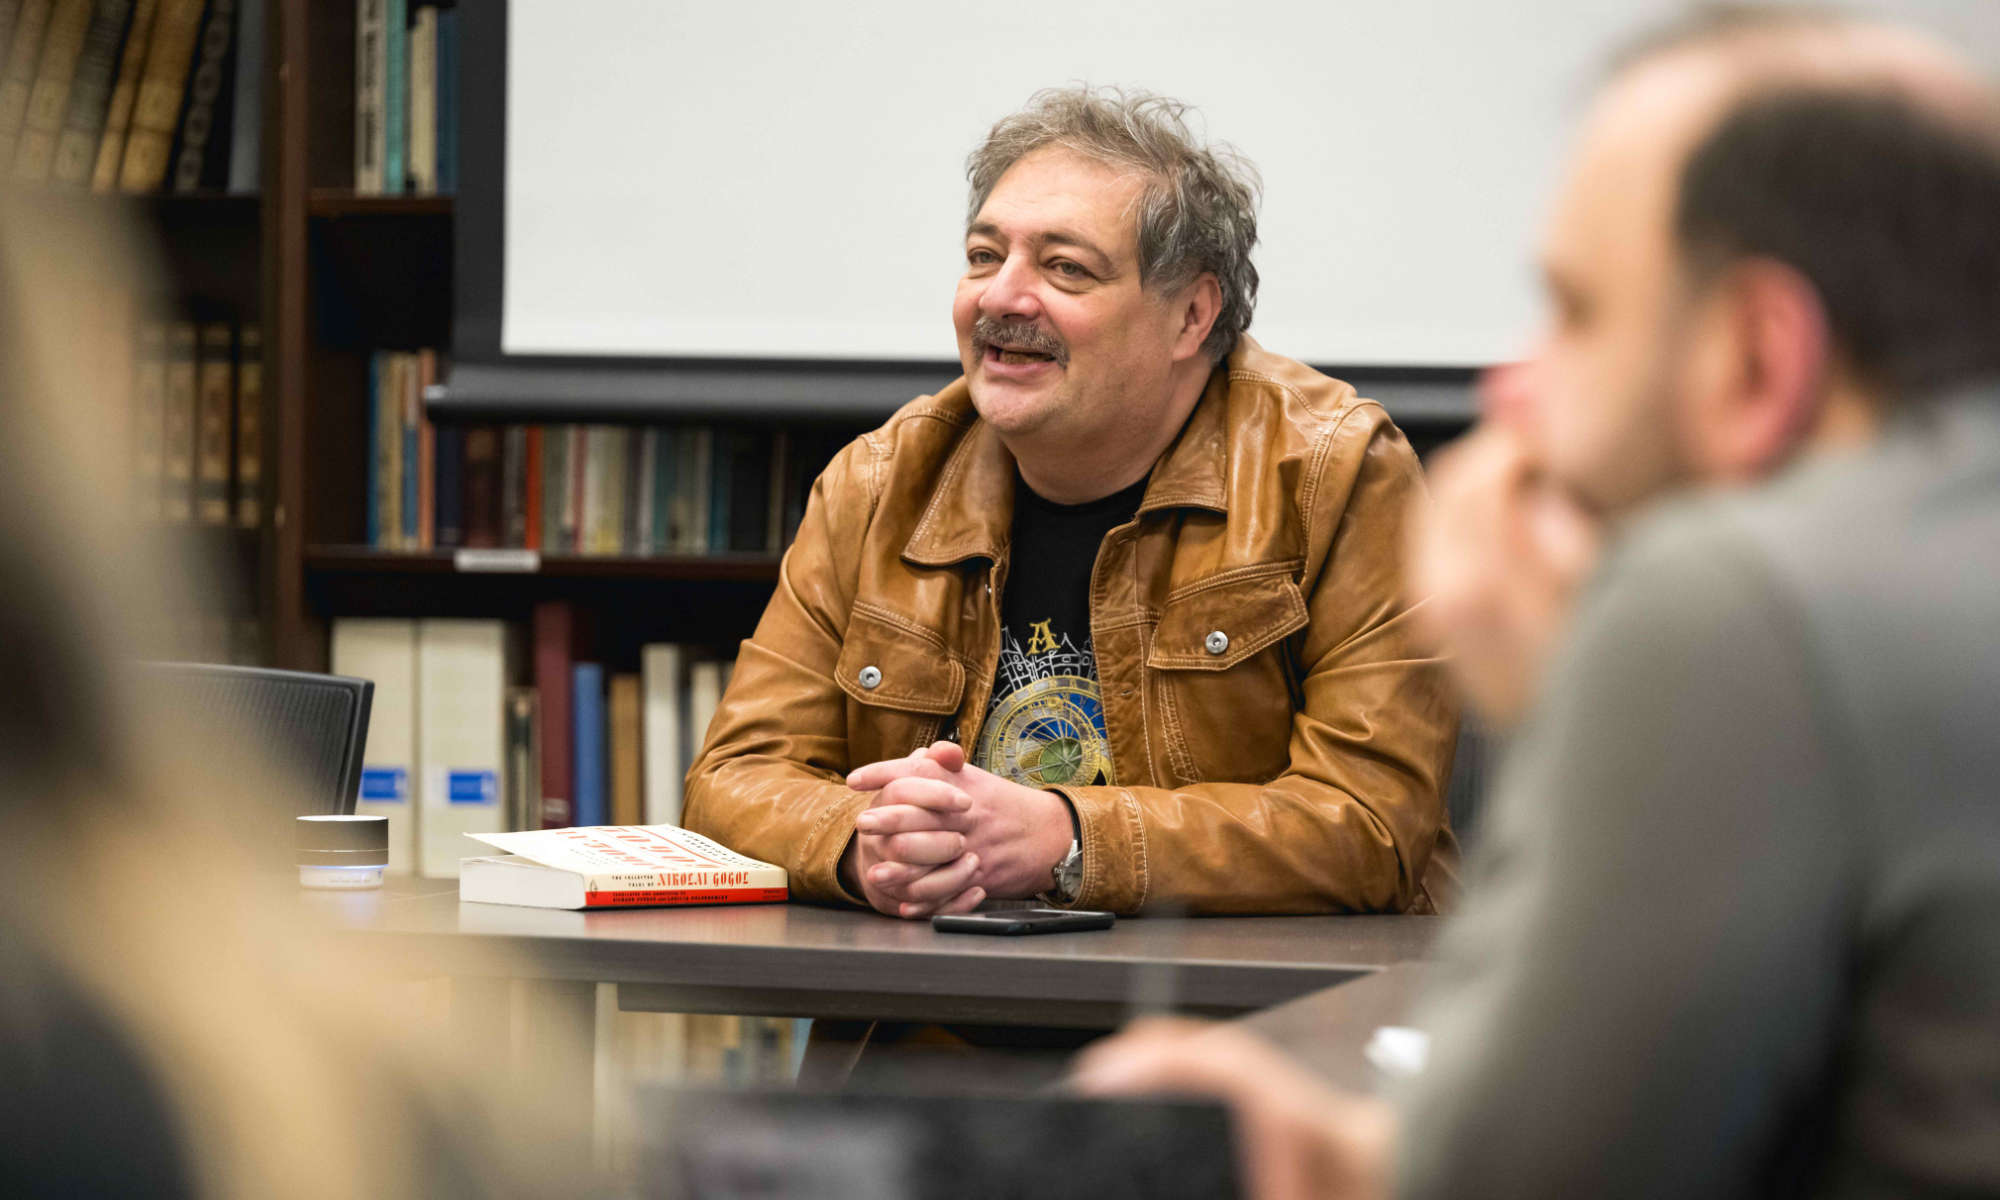 Dmitry Bykov seated at the front of a classroom with students in the foreground out of focus.